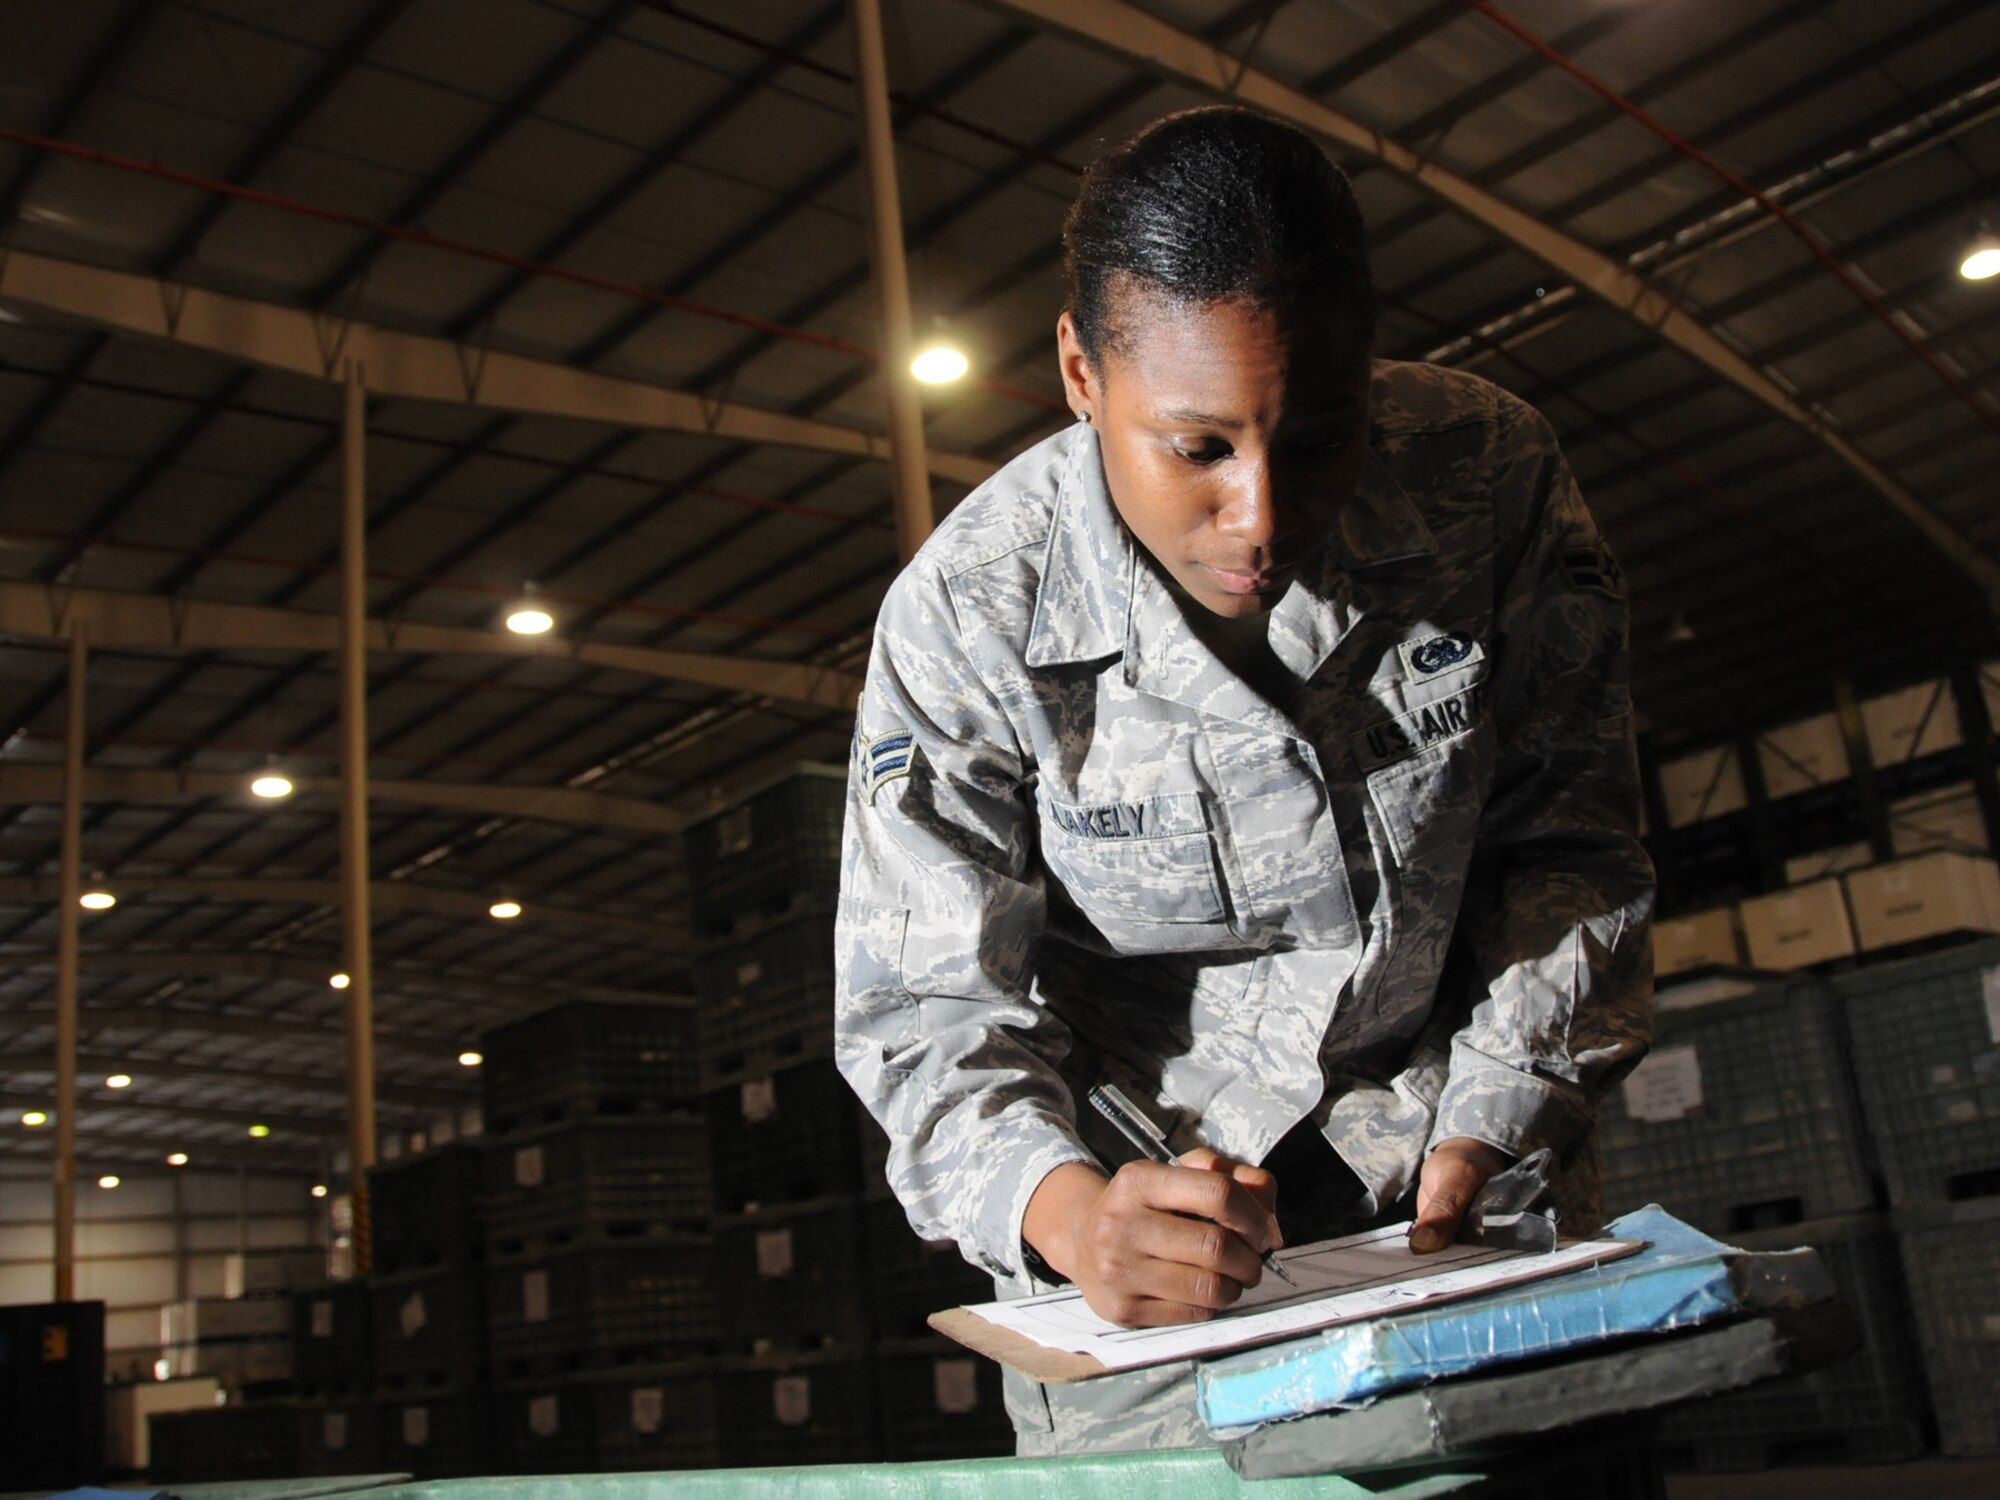 Airman 1st Class Lateshia Blakely, 379th Expeditionary Logistics Readiness Squadron readiness technician takes inventory of individual body armor plates in storage at the expeditionary theater distribution center warehouse, Oct. 1.The ETDC warehouse stores mobility equipment to be issued to transient personnel as the deploy to forward bases. Airman Blakely is deployed from Dover Air Force Base, Del. in support of Operations Iraqi and Enduring Freedom. (U.S. Air Force Photo/Tech. Sgt. Jason W. Edwards)